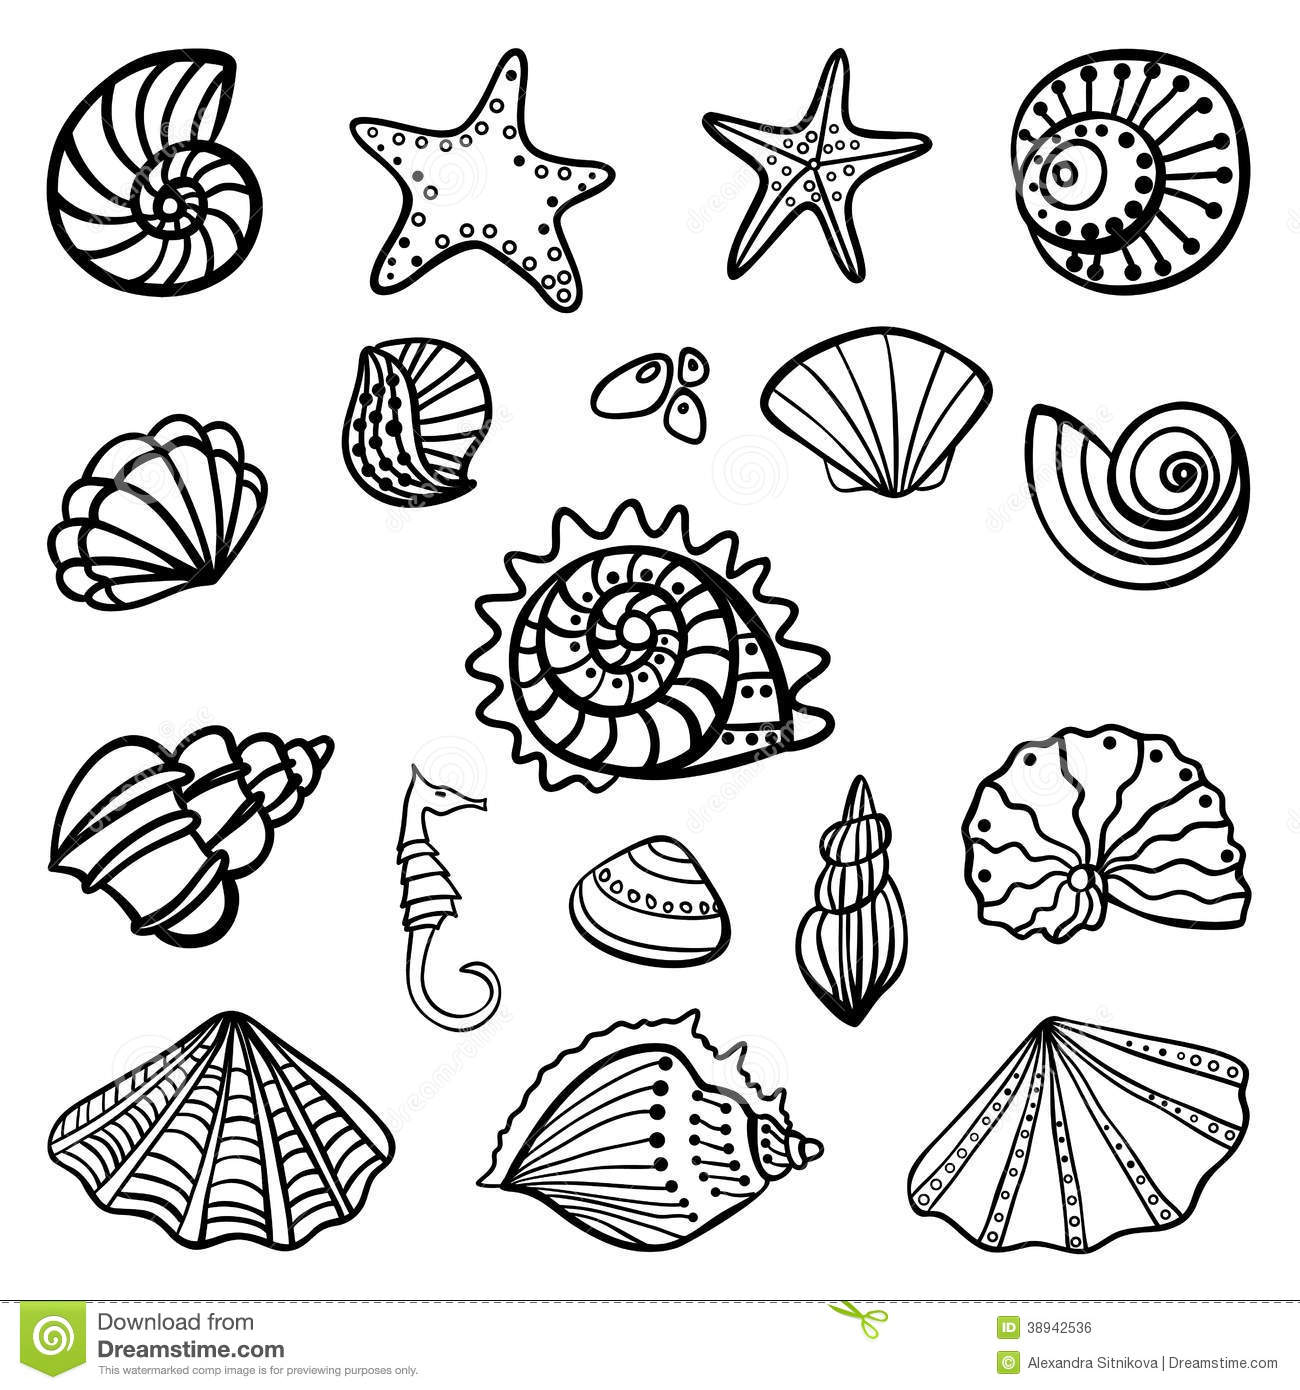 Shell coloring pages to download and print for free